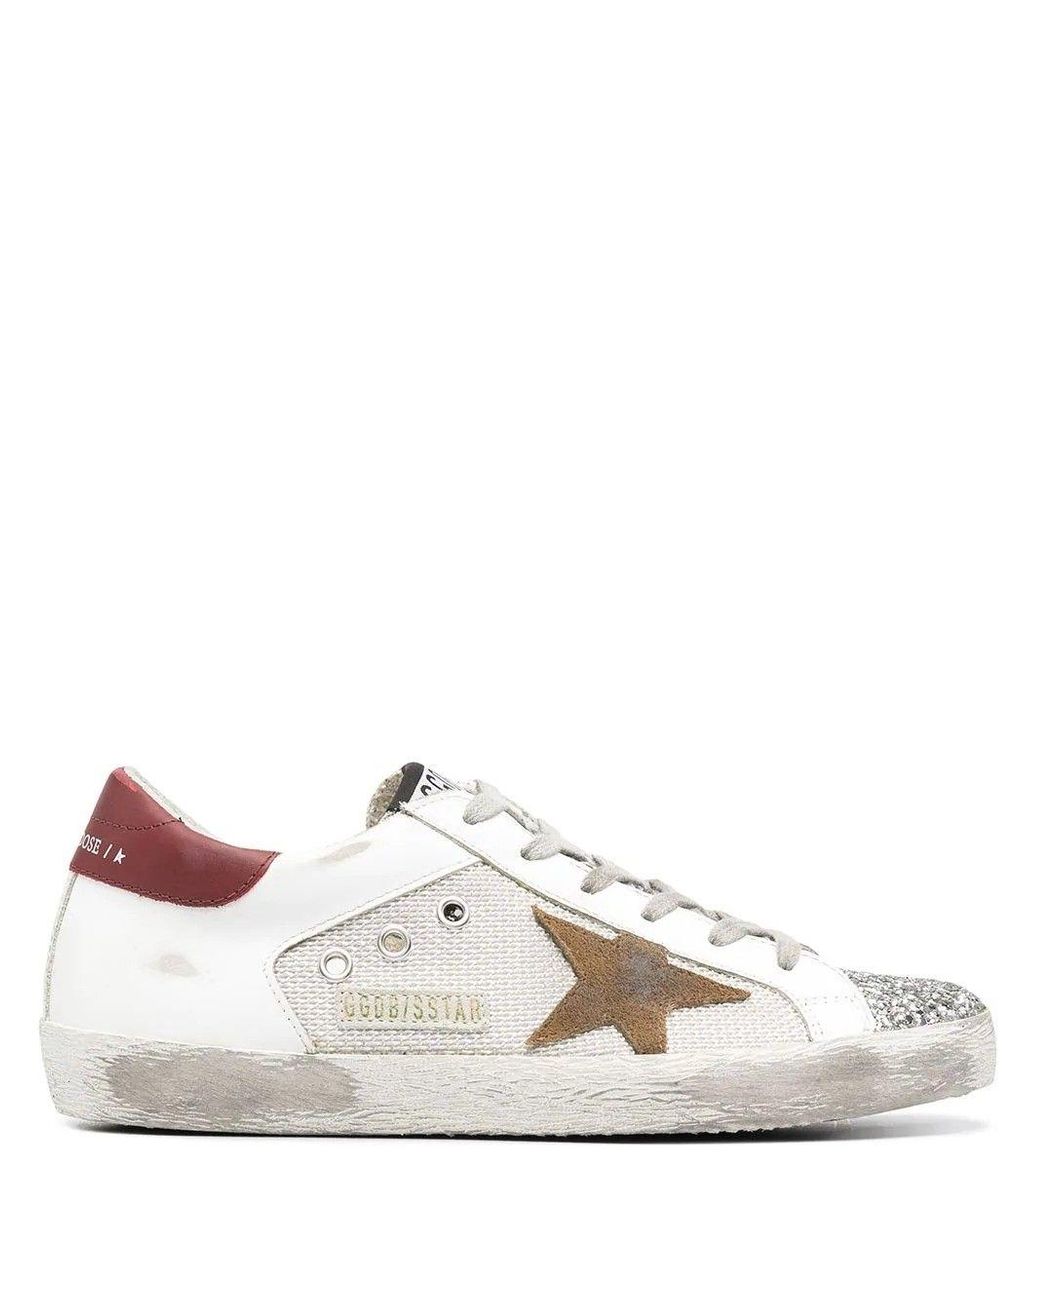 Golden Goose Deluxe Brand Goose Leather Sneakers in White - Lyst